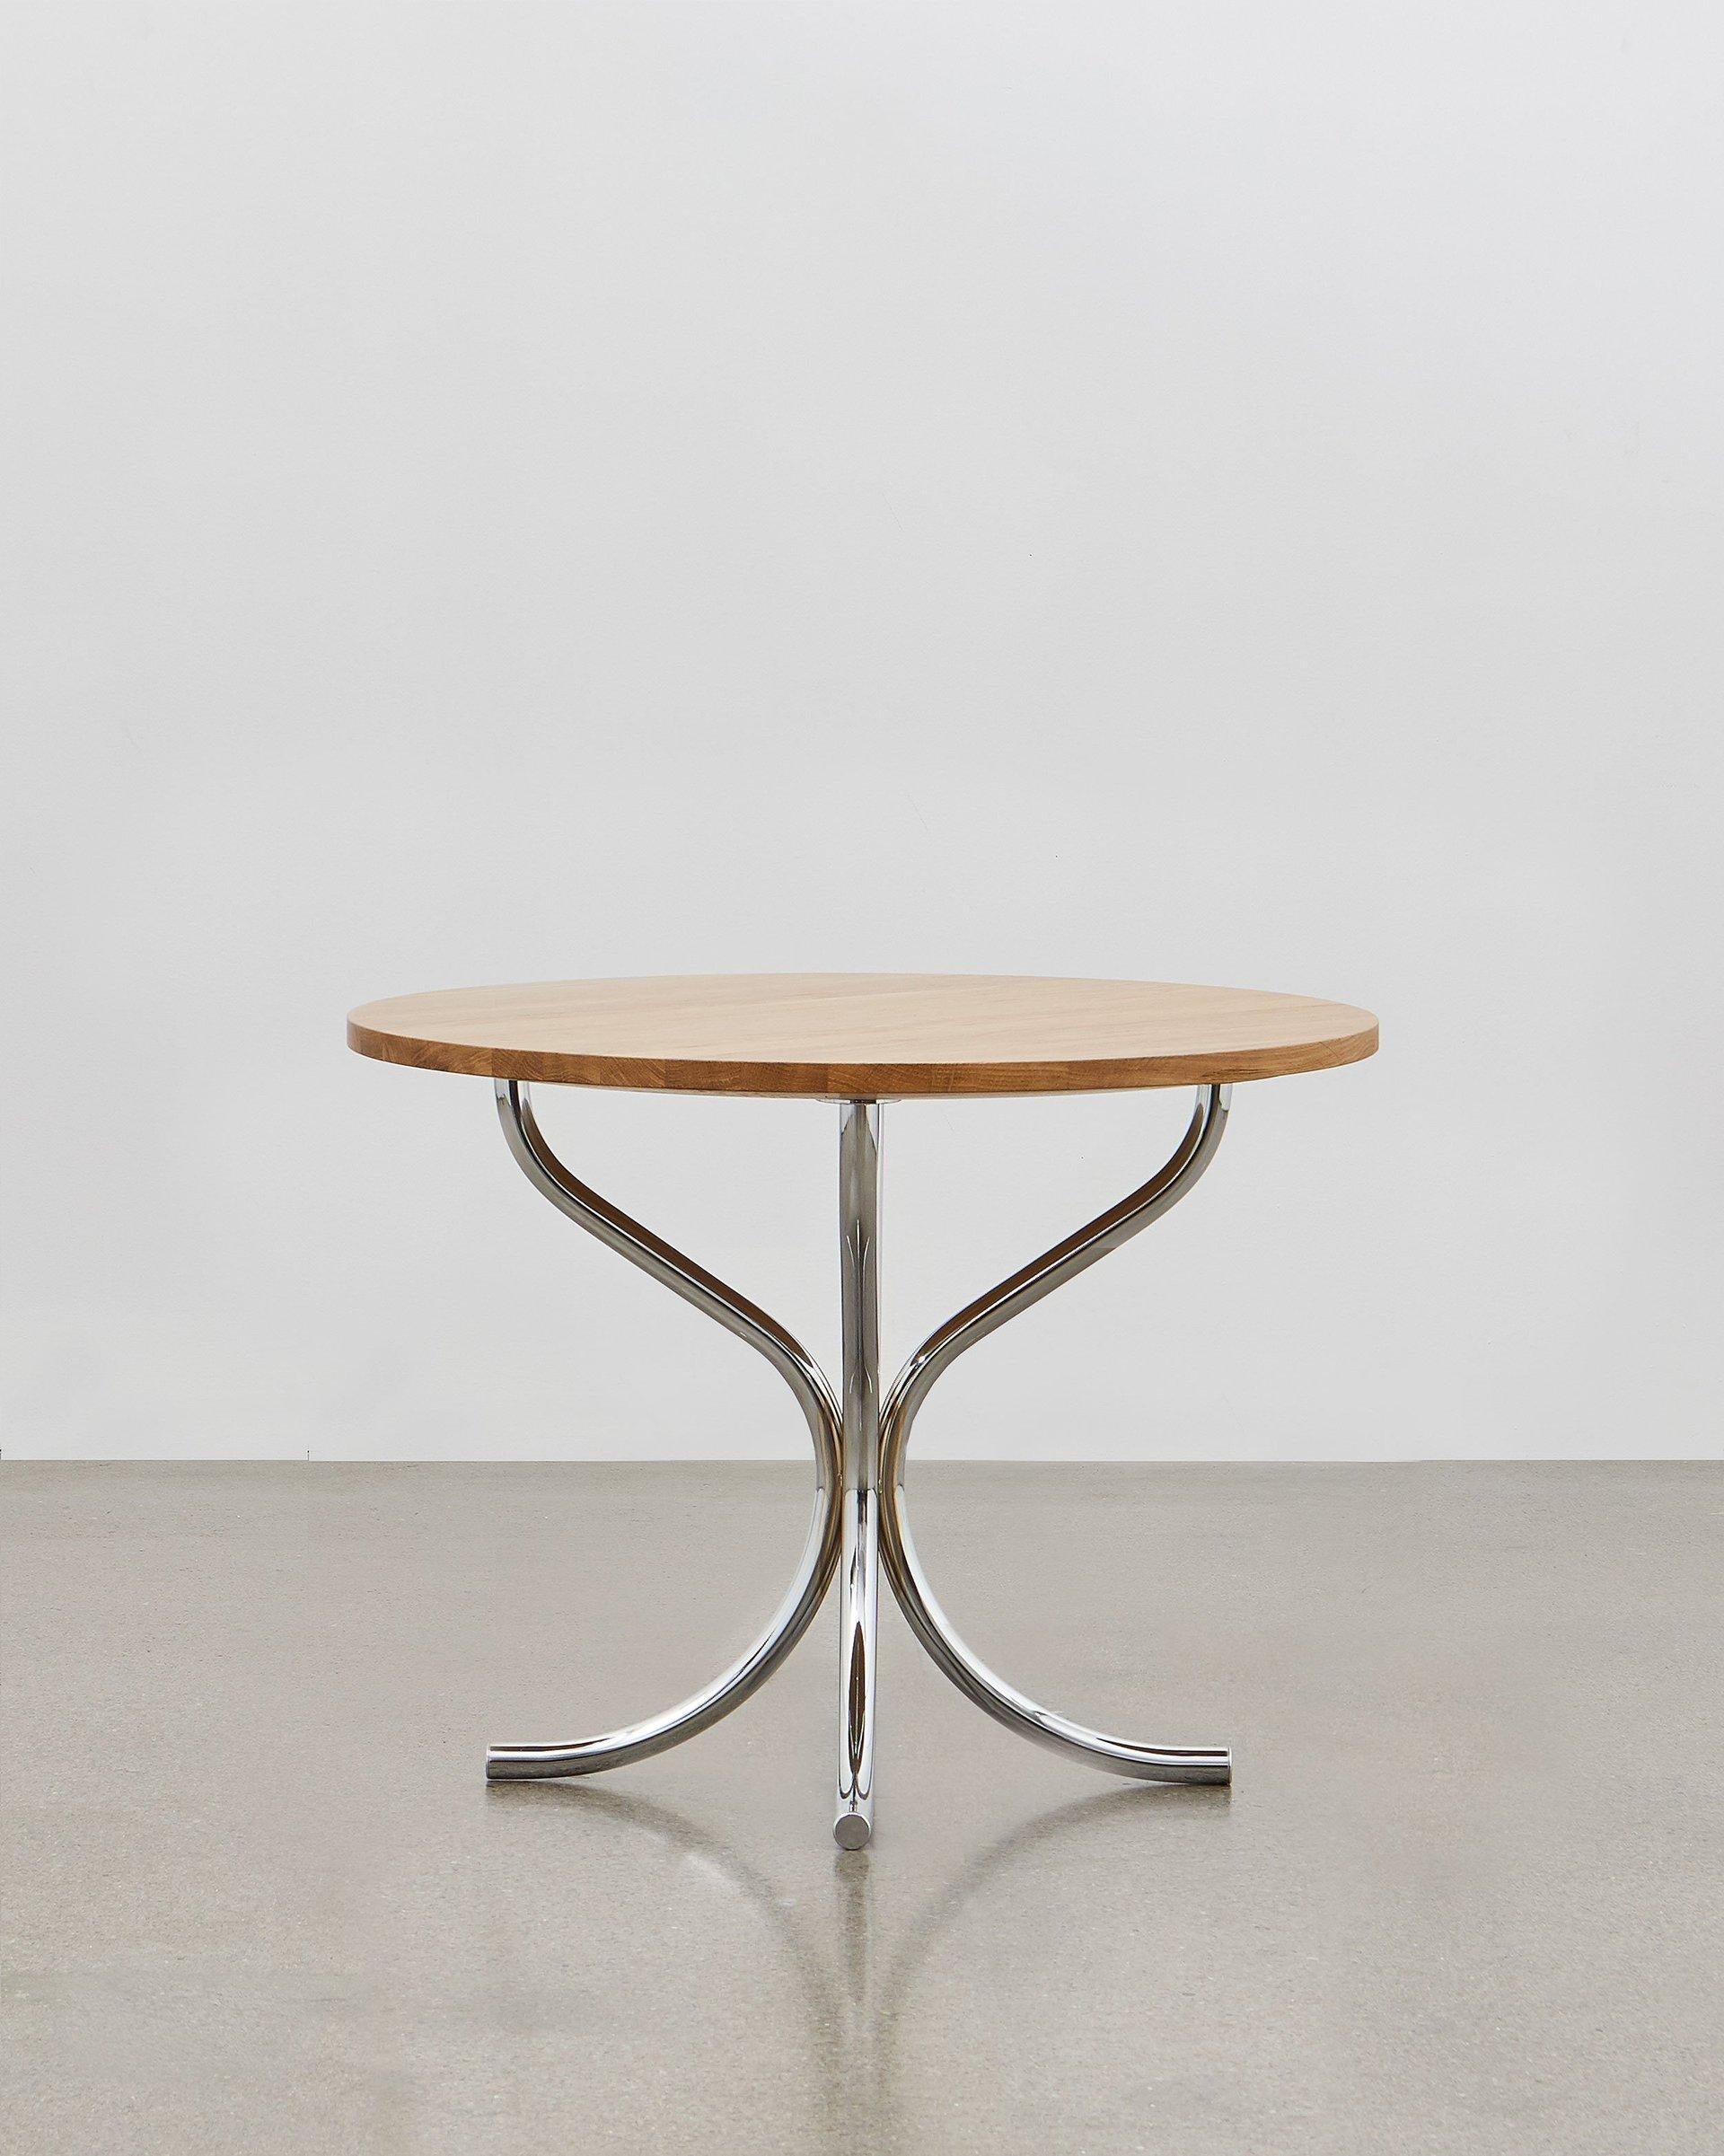 The PH lounge table designed by Poul Henningsen is the perfect addition to any lounge space where a table is required to gather around or for display. Taller than a low coffee table, the PH lounge table lends itself to a wide variety of settings,